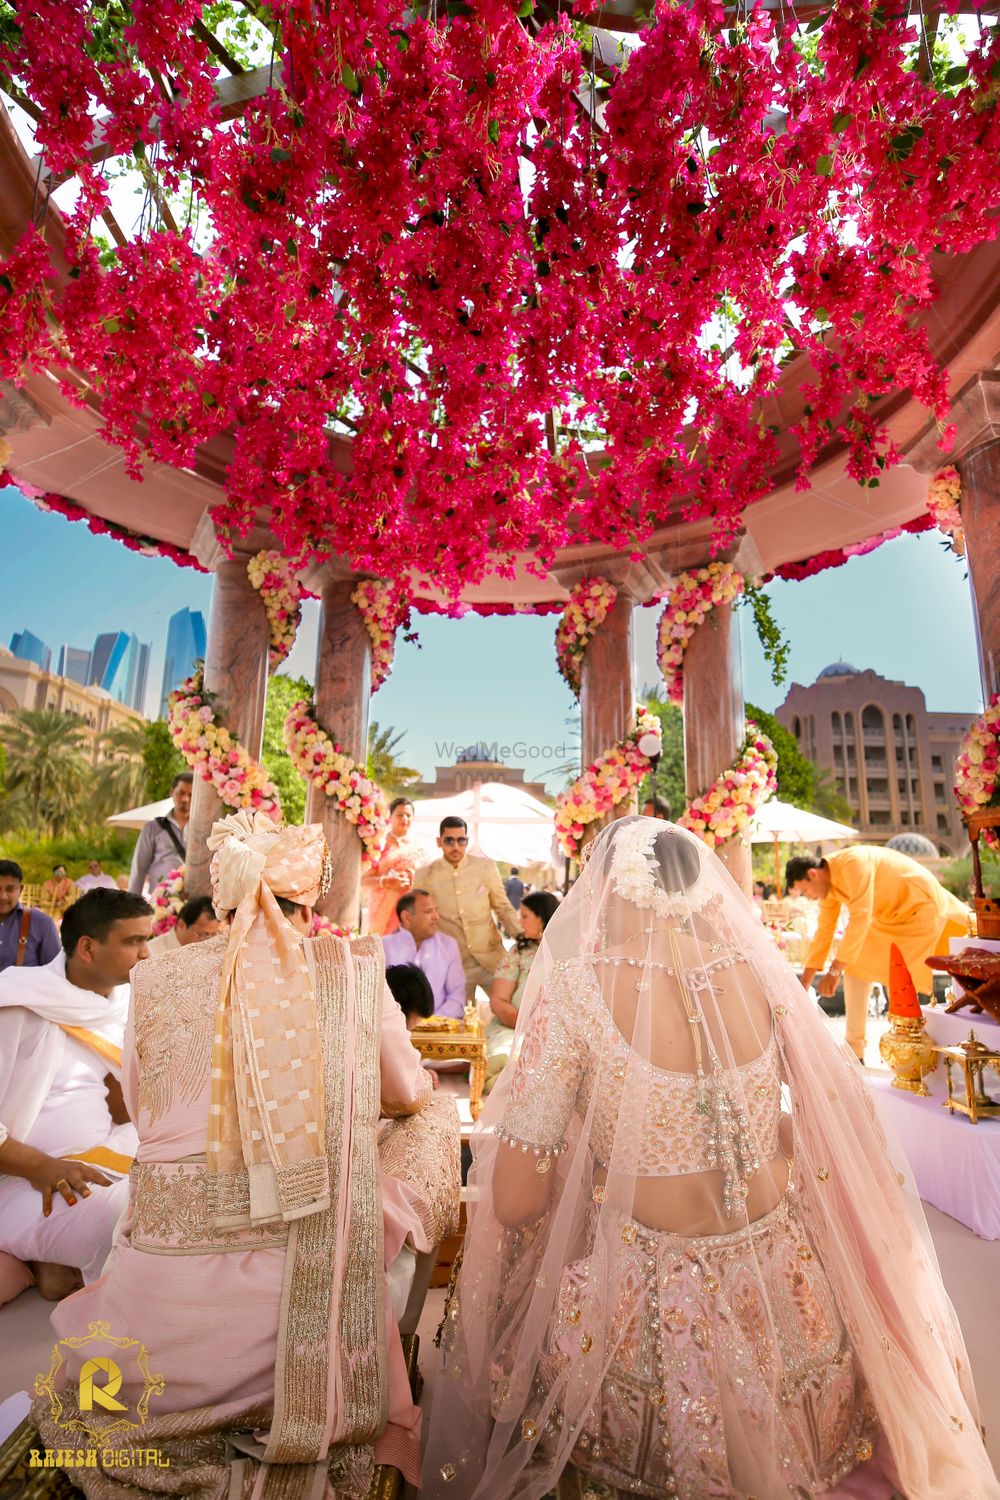 Photo of Floral mandap decor in red